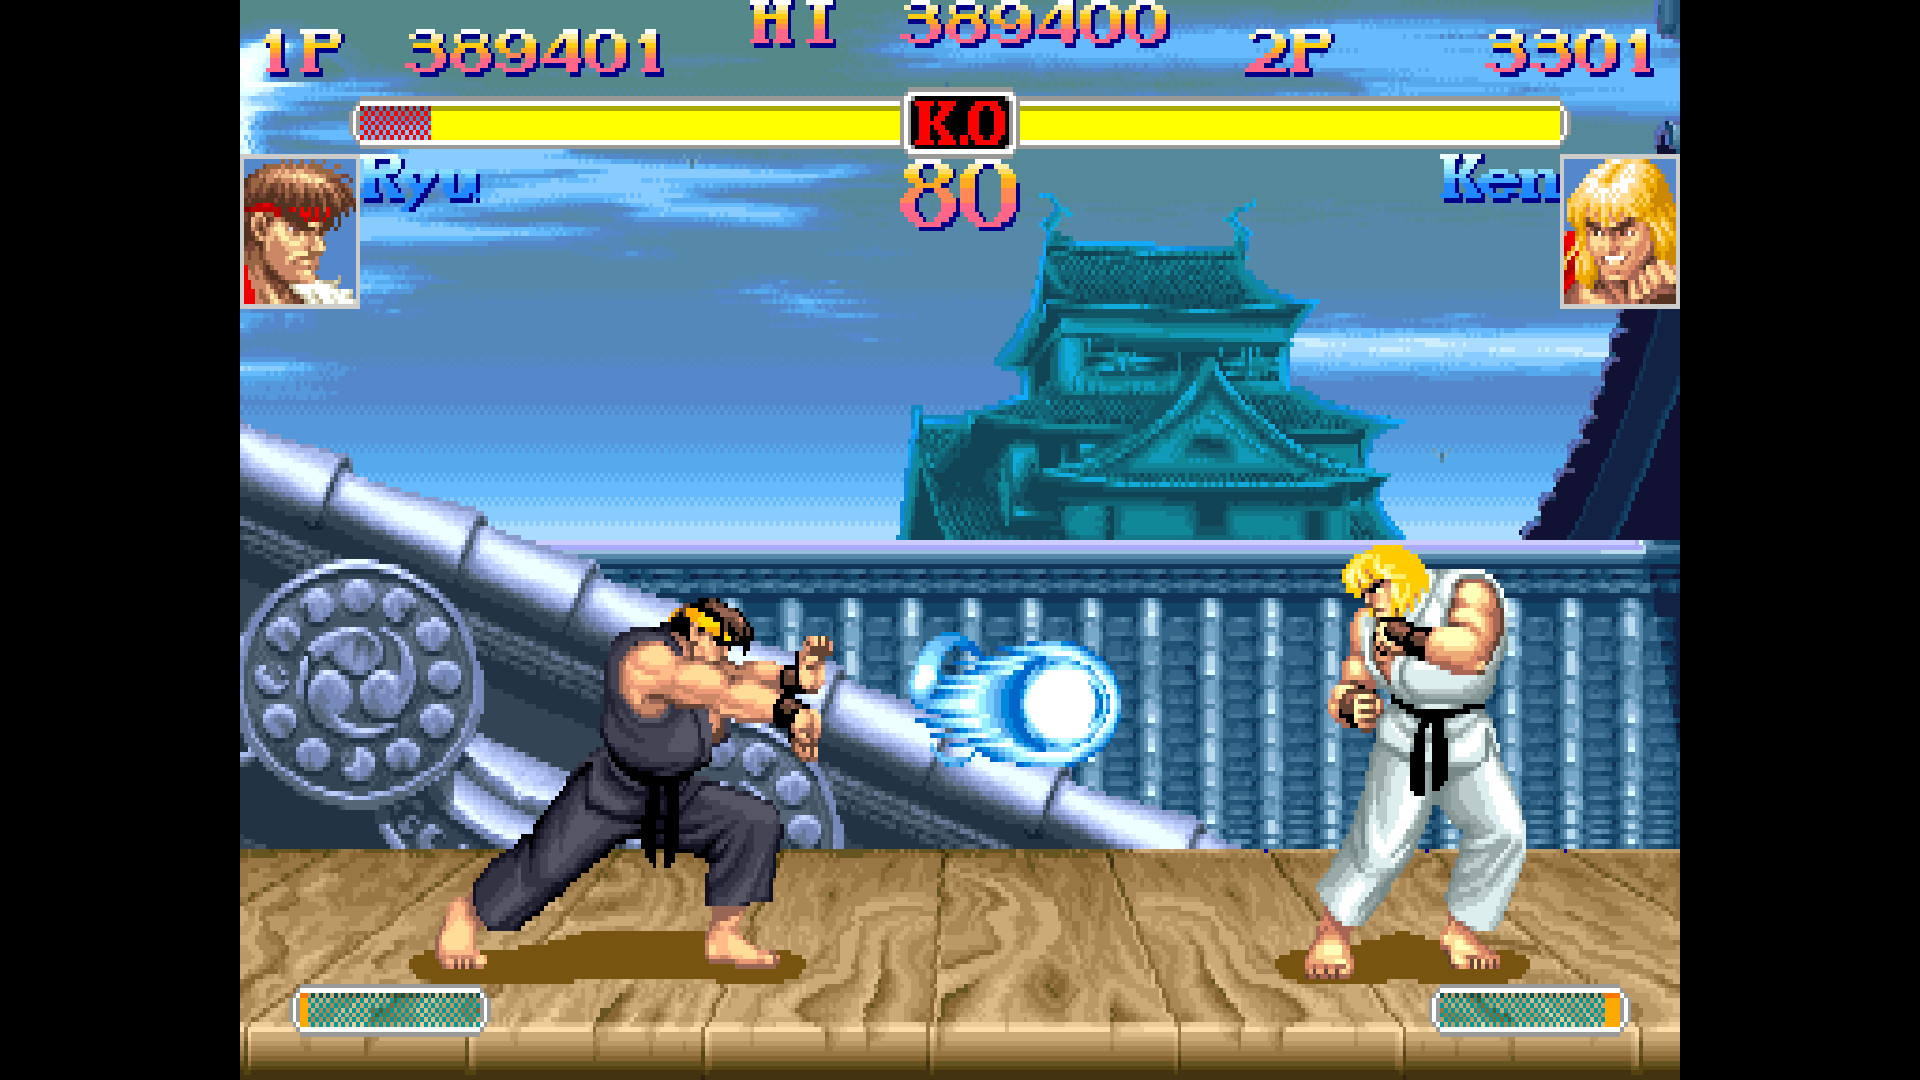 Reviews - Super Street Fighter II Turbo (Video Game)